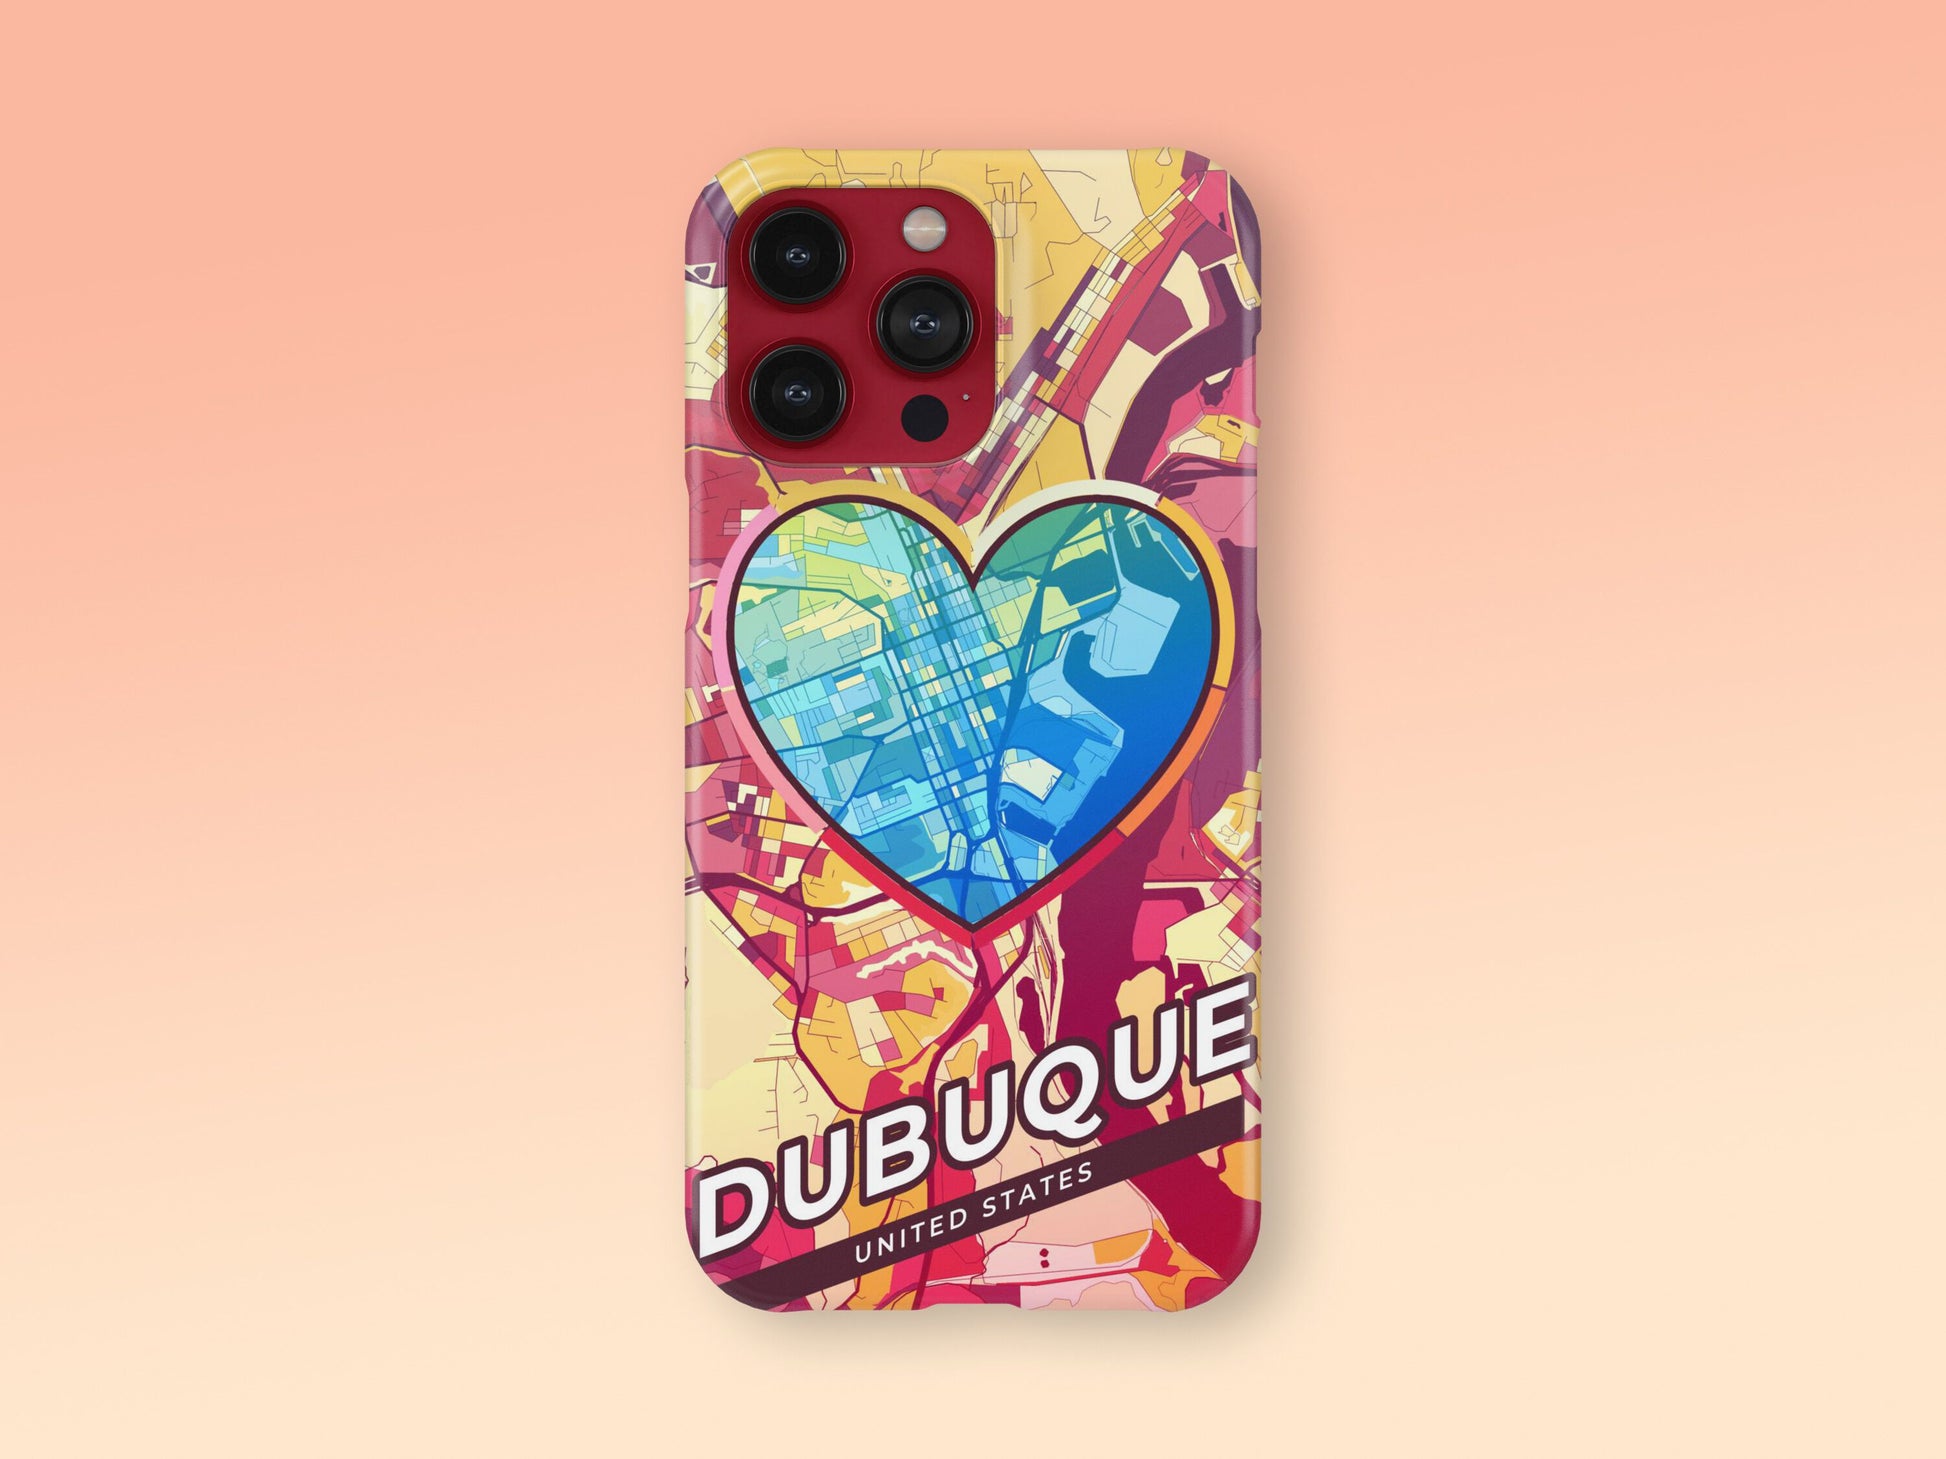 Dubuque Iowa slim phone case with colorful icon. Birthday, wedding or housewarming gift. Couple match cases. 2